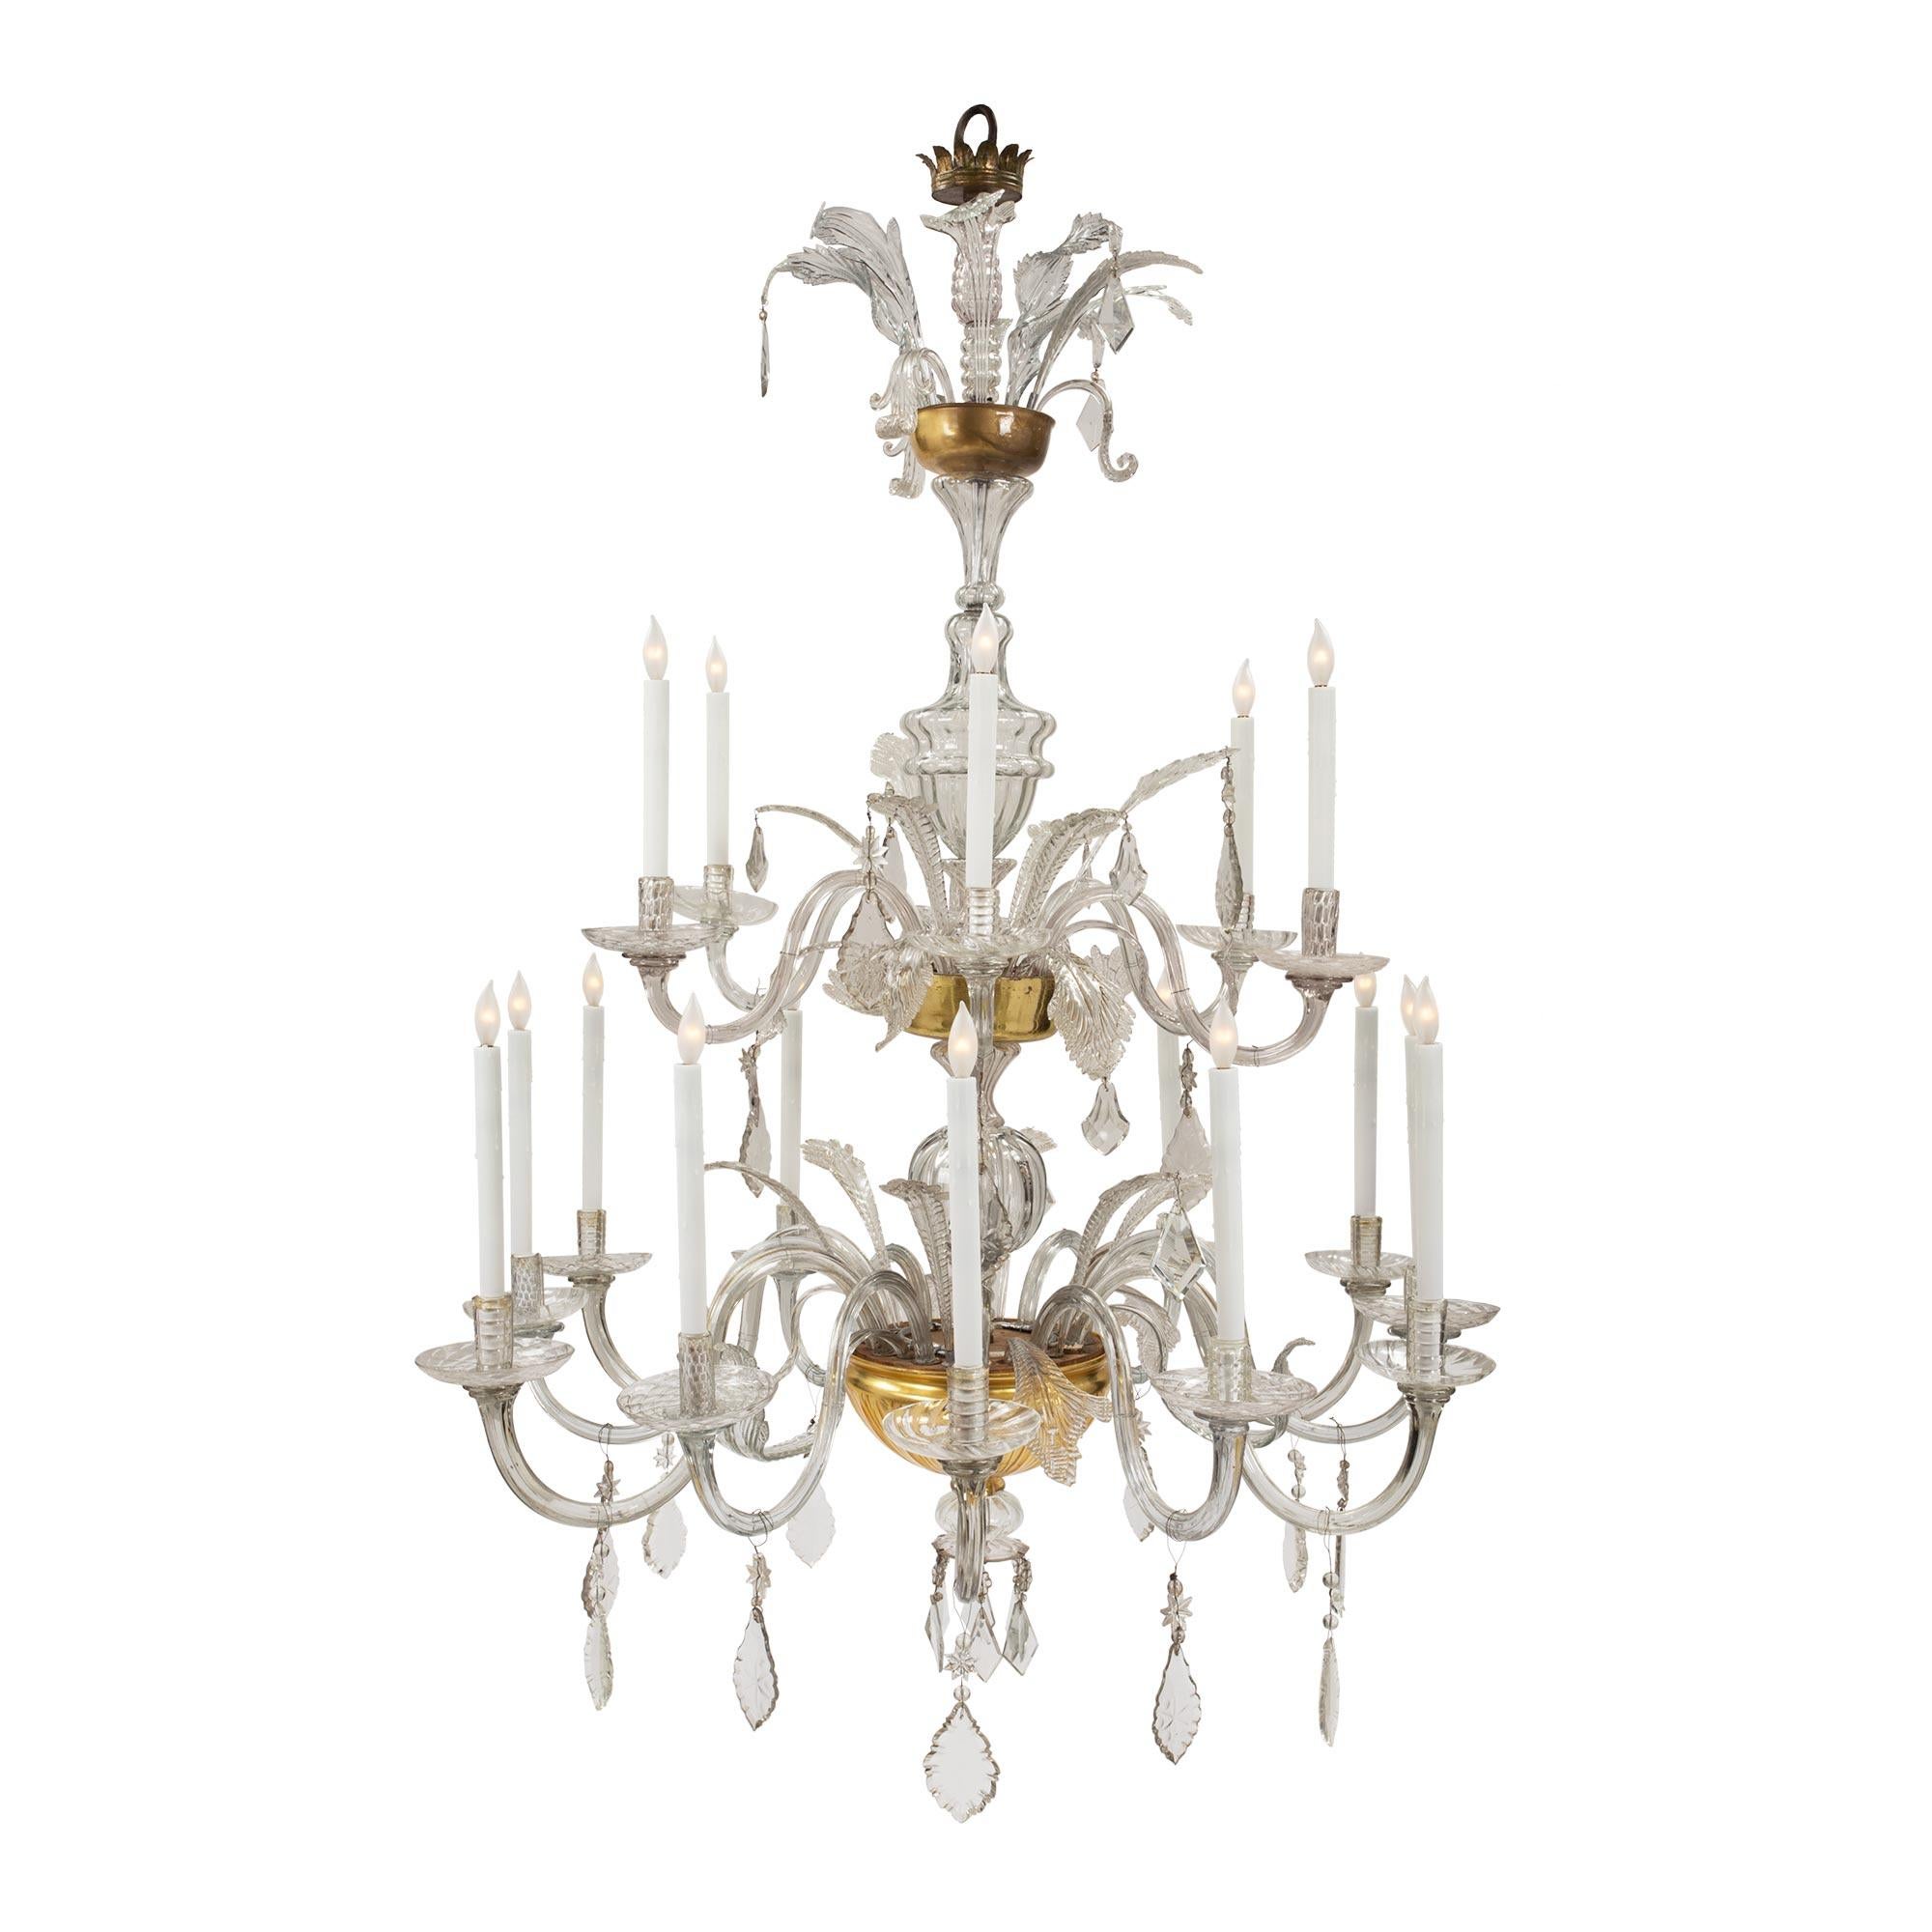 A sensational and large scaled Italian 18th century glass and gilt eighteen light Tuscan chandelier. The chandelier has two levels of light with a most impressive cut glass gilt bowl above a hand blown glass sphere and circular saucer with kite